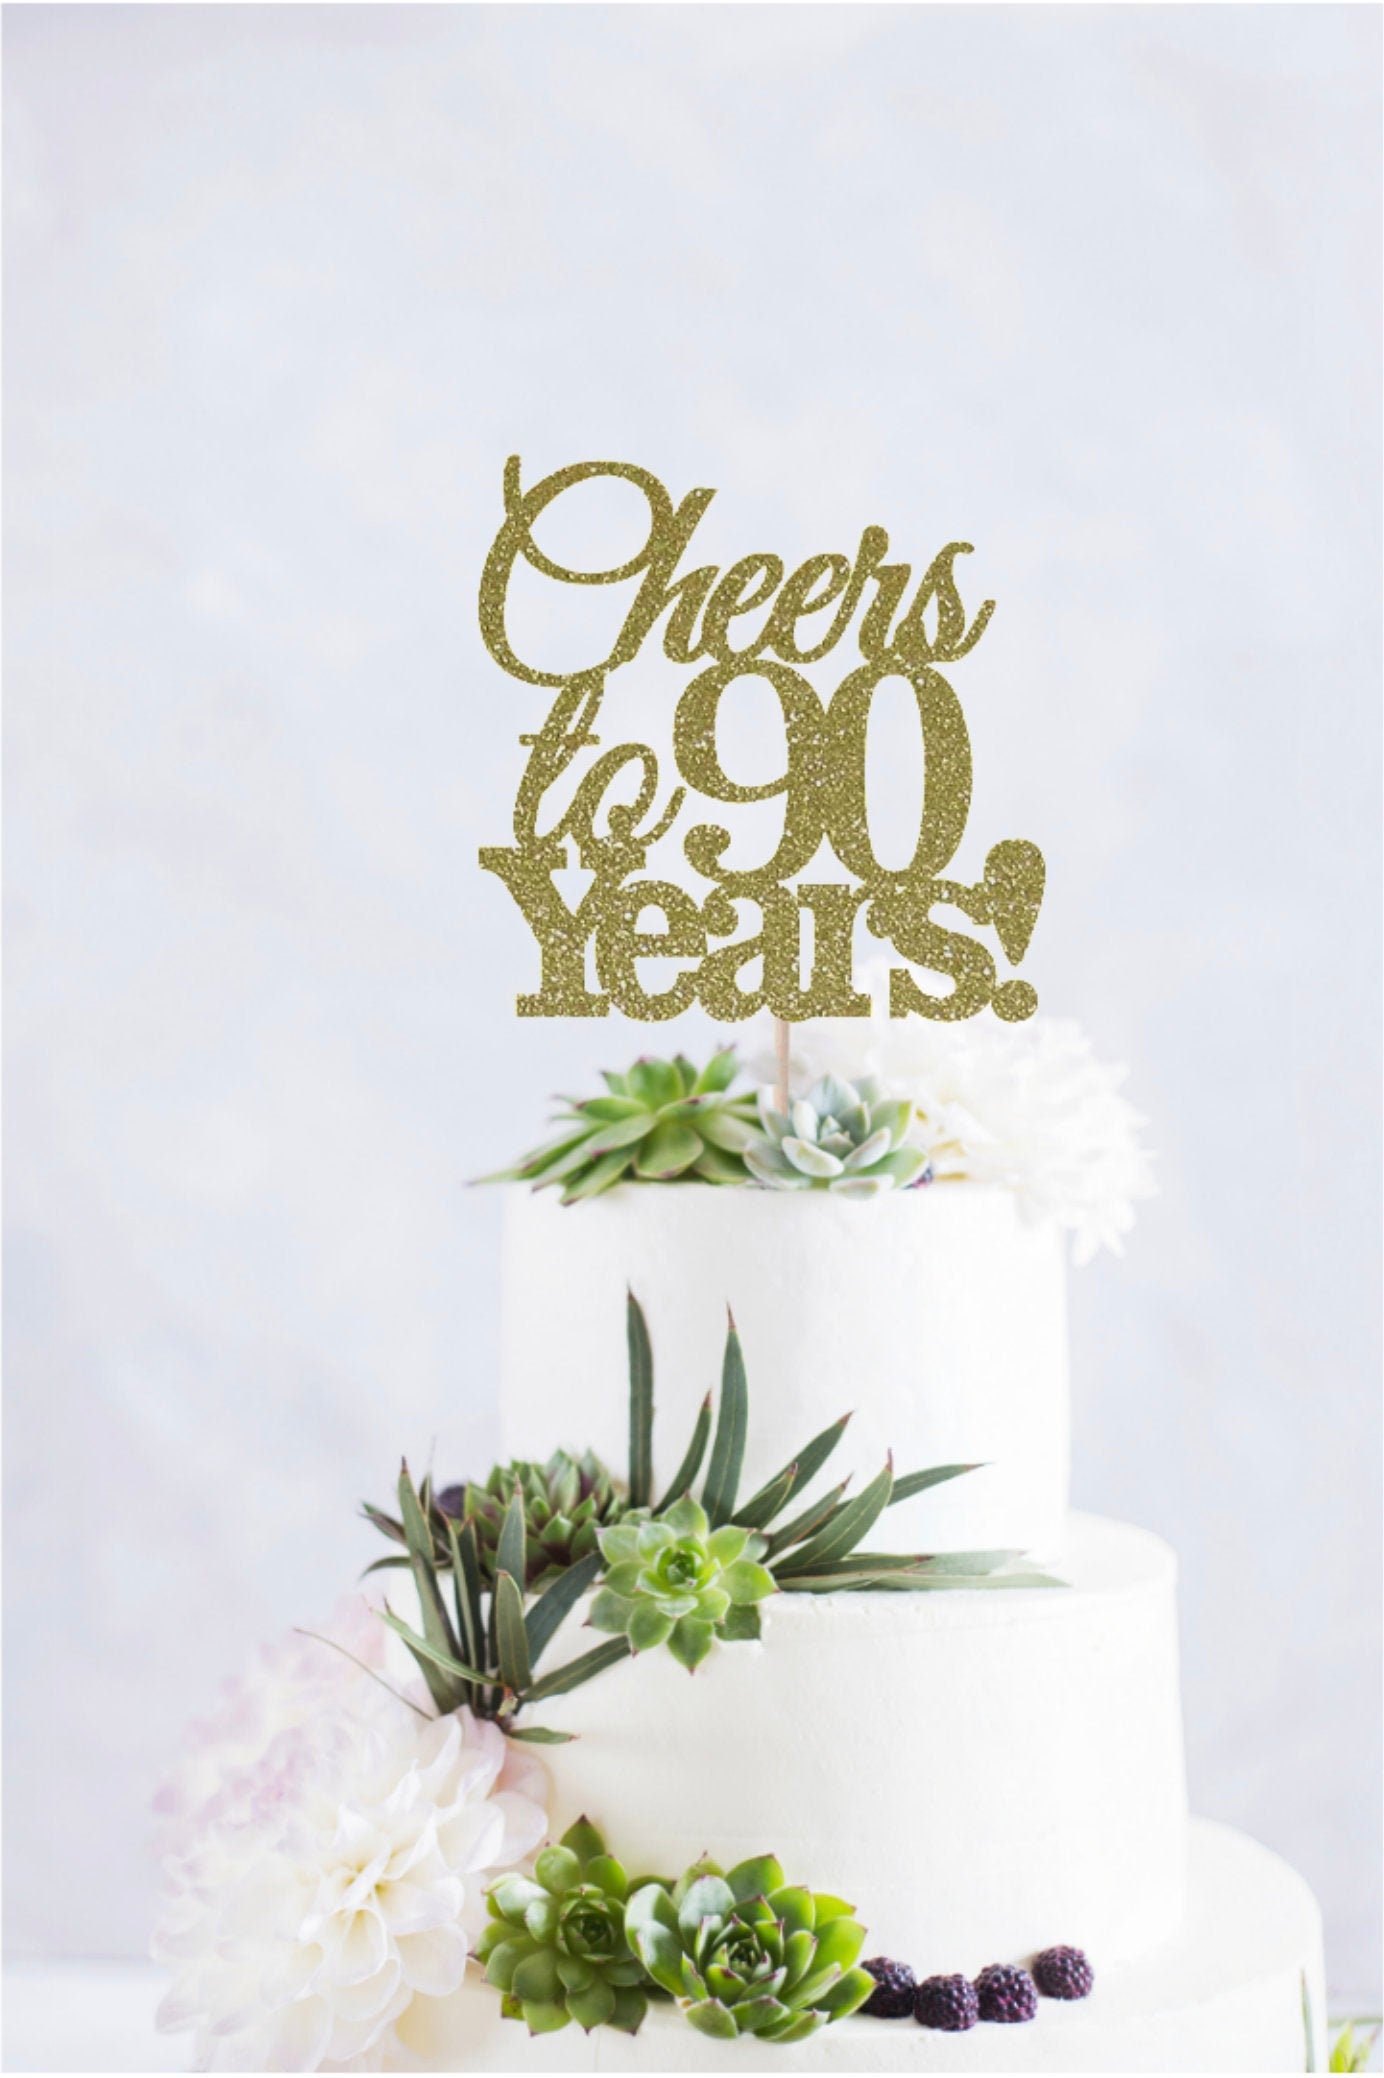 Buy Cheers to 90 Years Cake Topper 90th Birthday Cake Topper ...